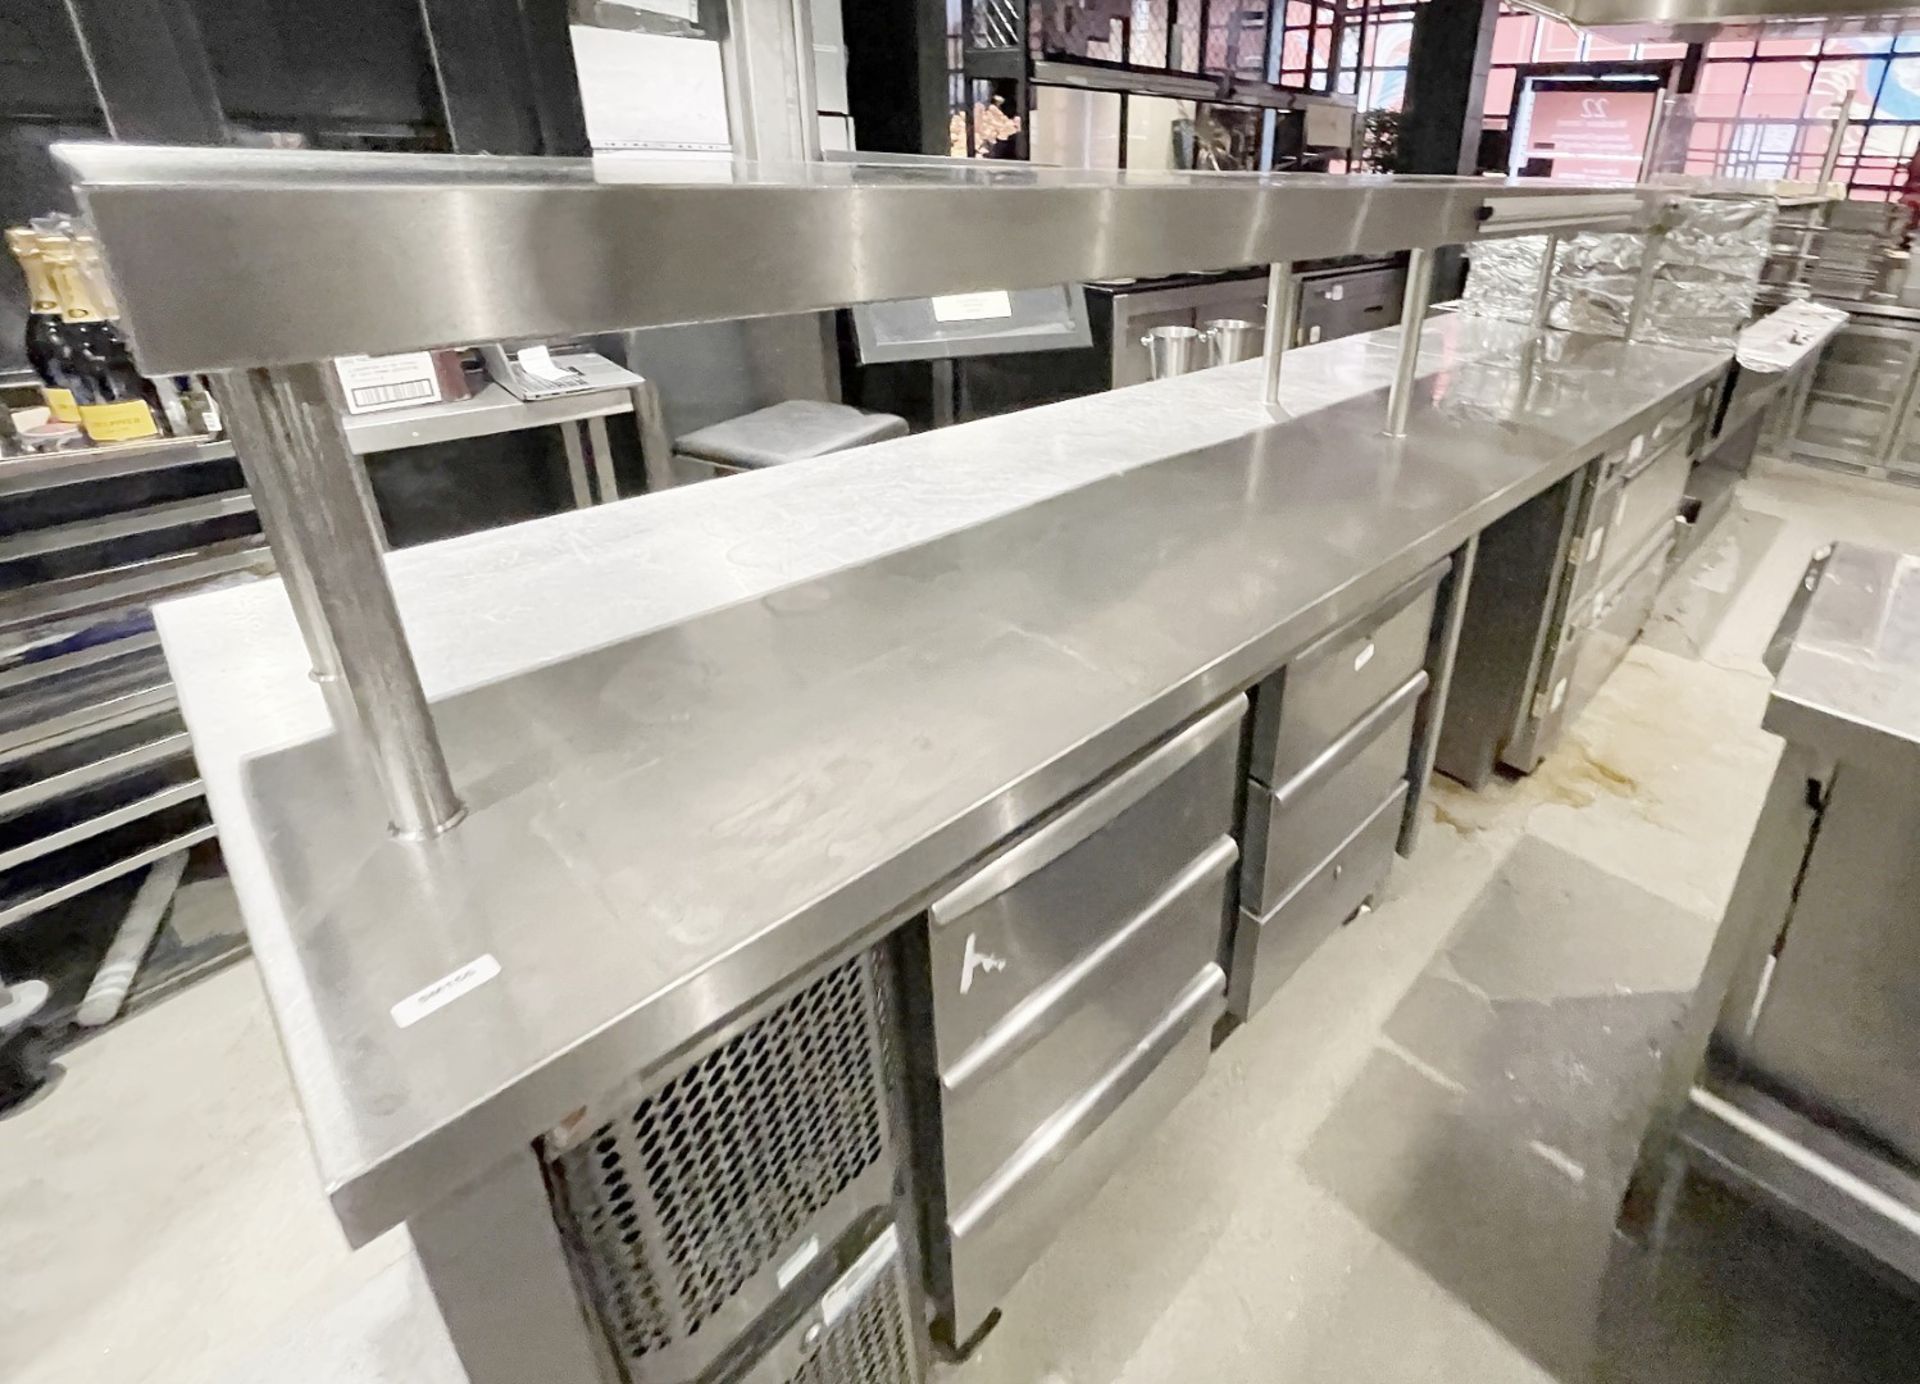 1 x Bespoke 15ft Commercial Kitchen Preparation Island with a Stainless Steel Construction - Image 3 of 15